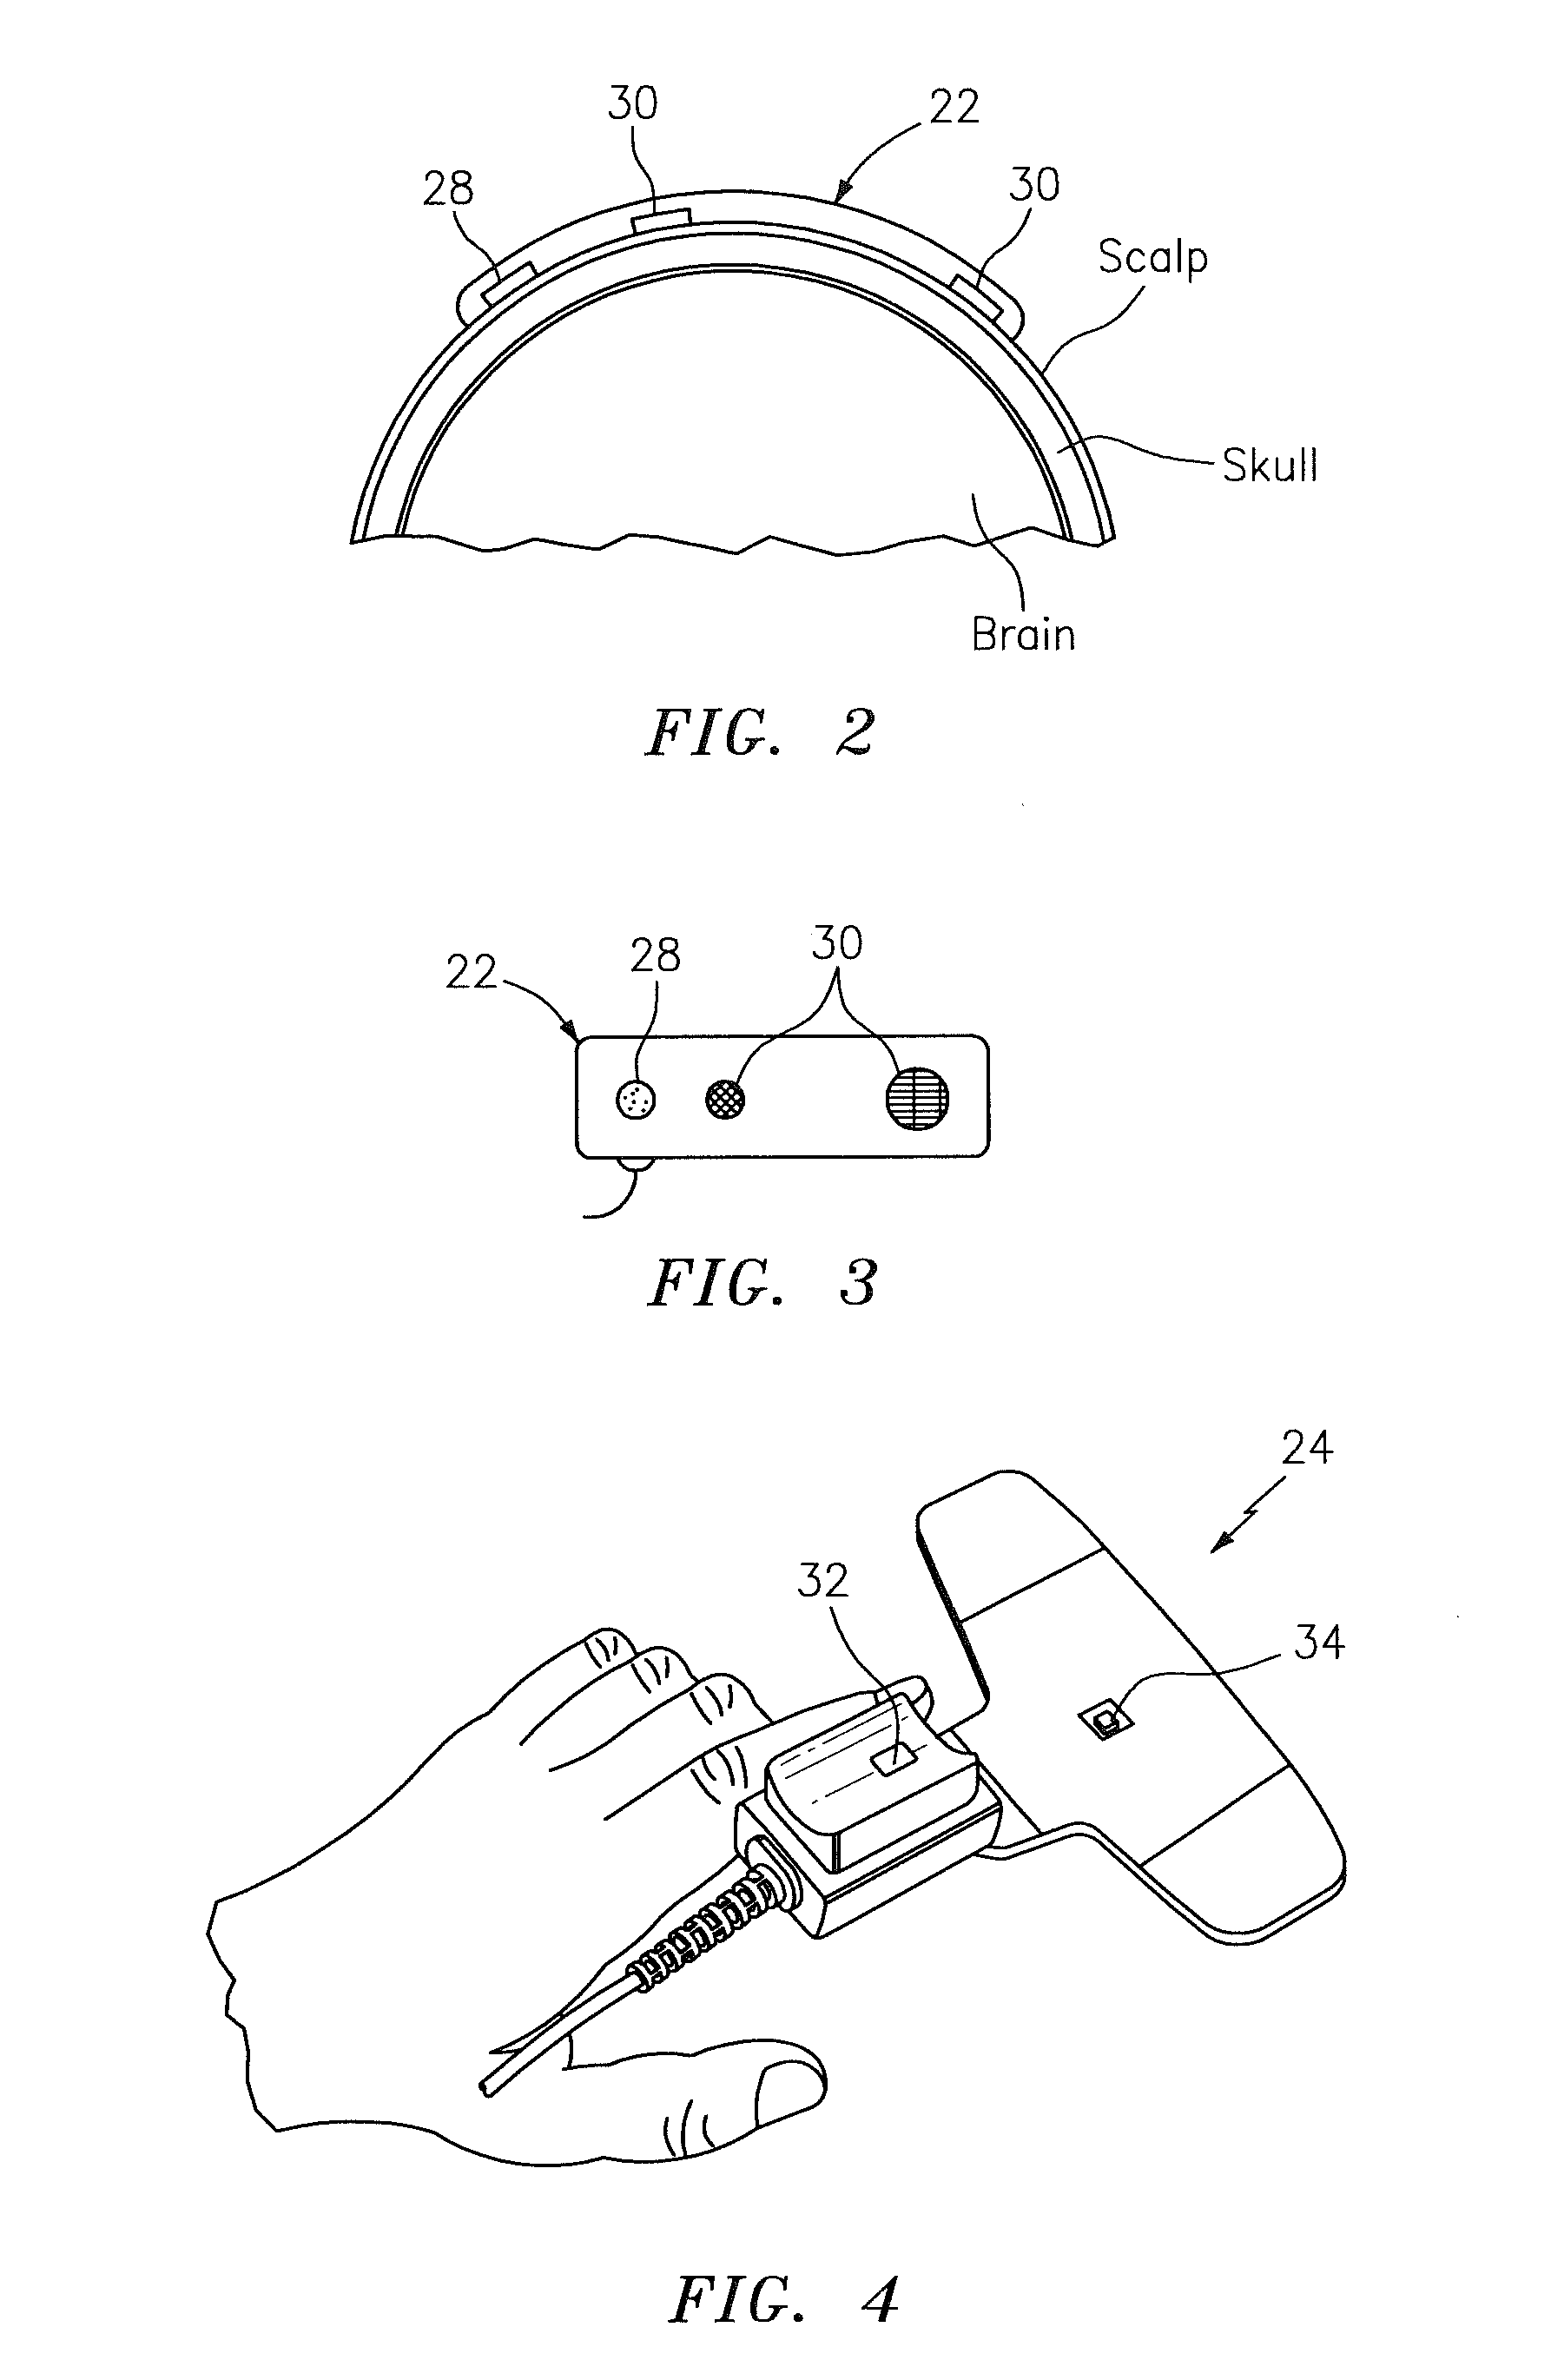 Method and apparatus for determining an oxygen desaturation event